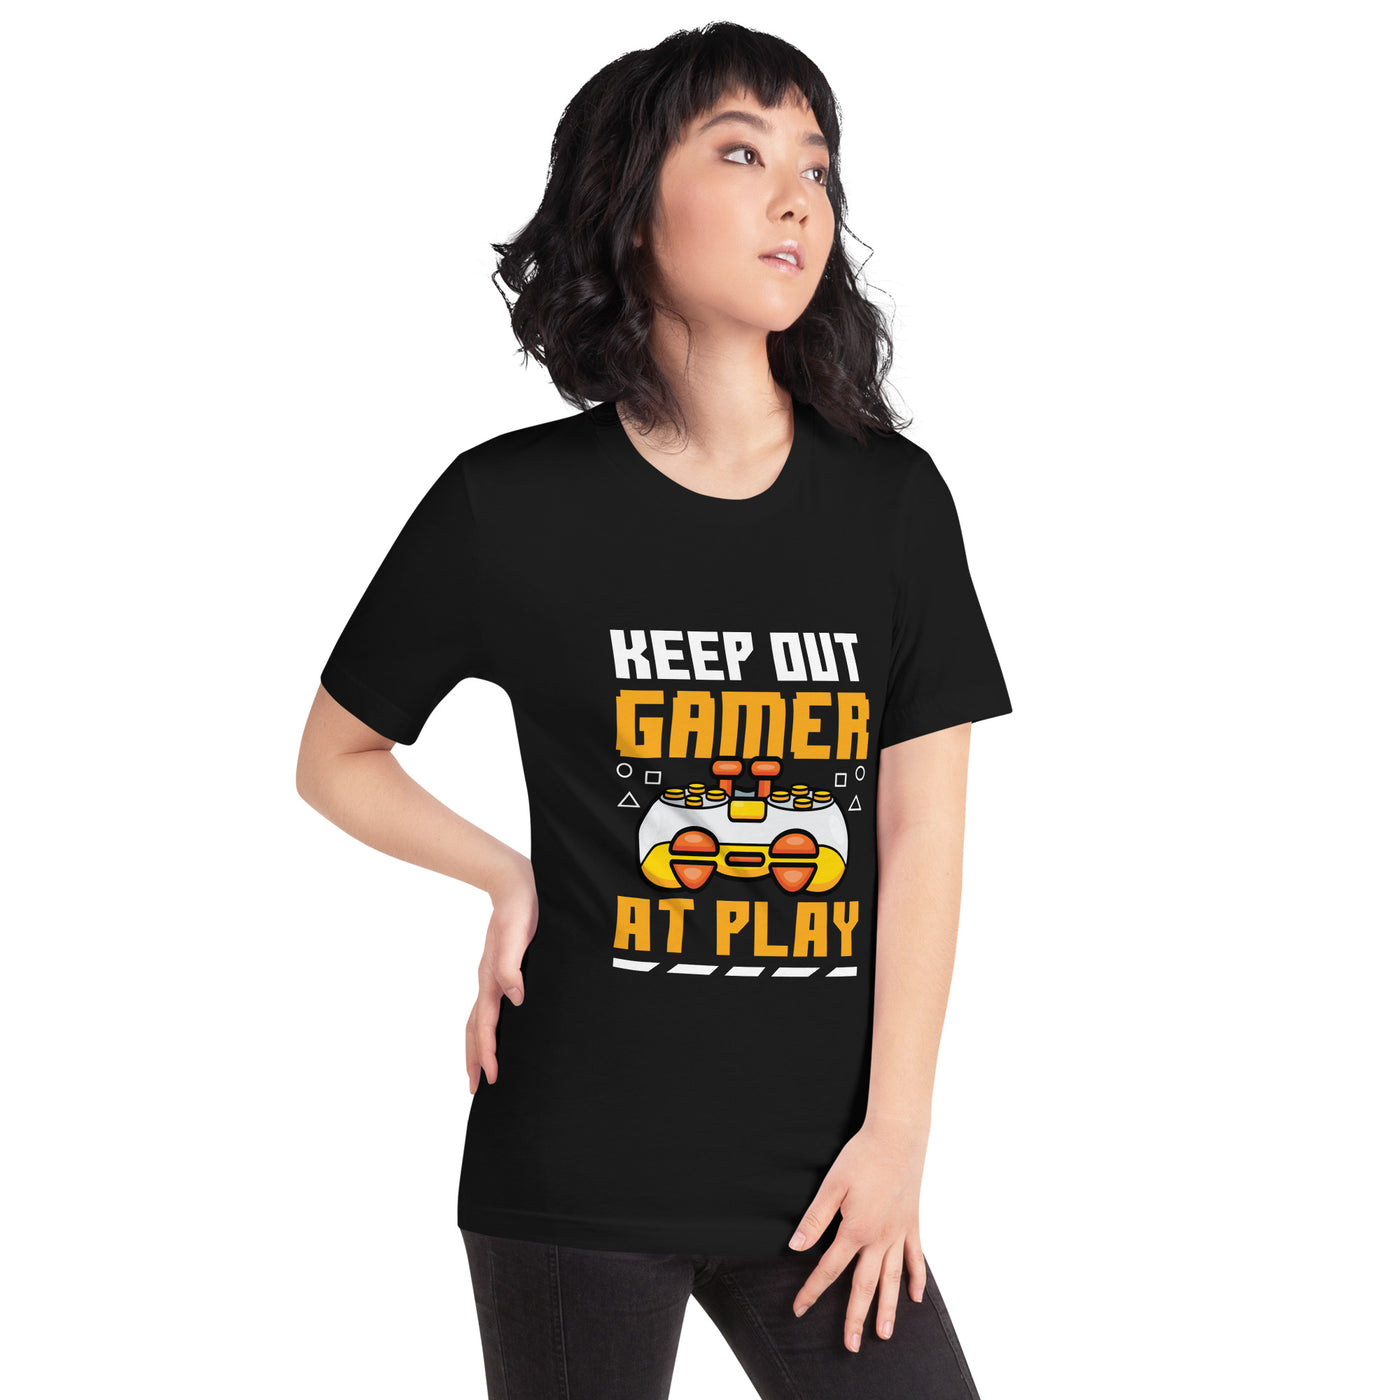 Keep Out Gamer At Play Rima 7 - Unisex t-shirt